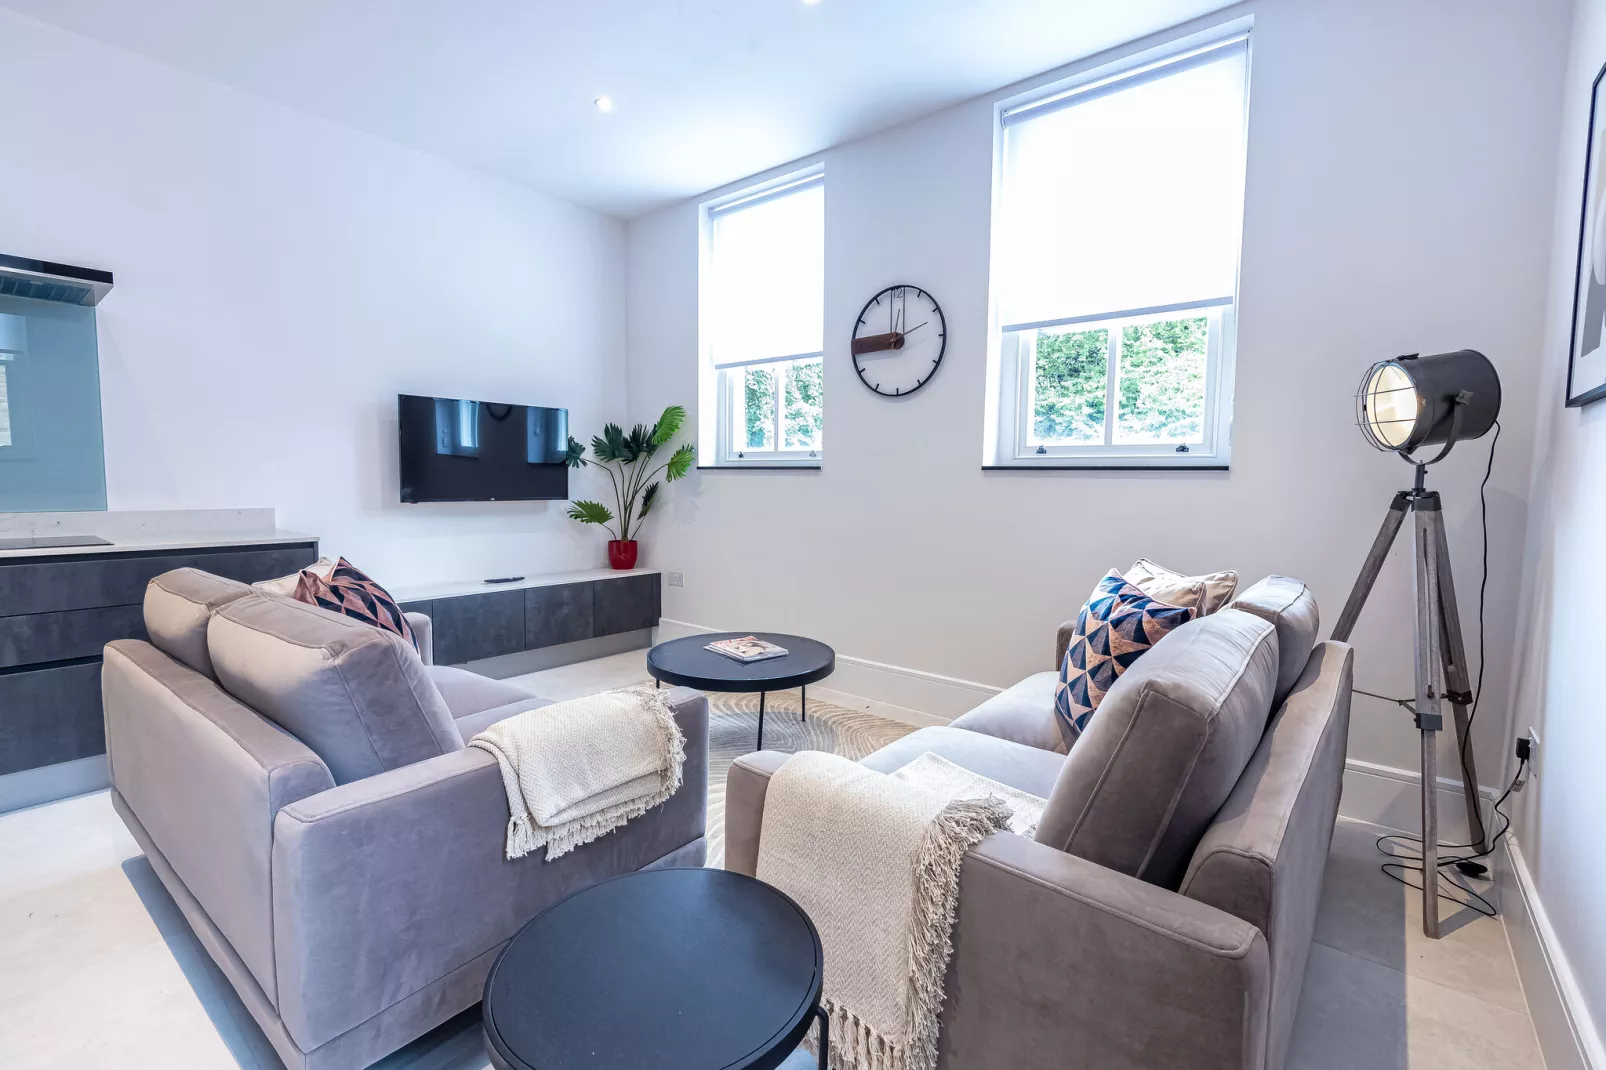 4 Bedroom Apartment 2 Bathroom Hungerford Road